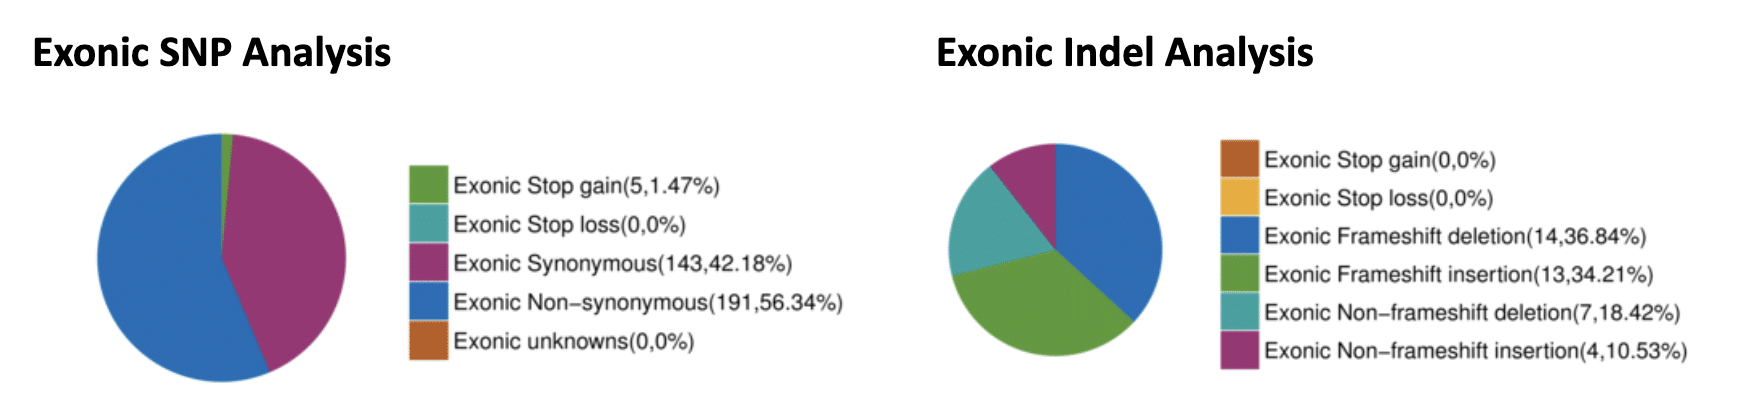 Fig. 6: Exonic SNP and Indel Analysis. SNPs and Indels were detected and filtered for those occurring within exons. Within the coding regions, 143 synonymous SNPs were identified that should not have an effect on the protein coding sequence. However, 191 non-synonymous SNPs and 5 early stop SNPs were also identified that may affect protein function. Also, 27 frameshift causing insertions and deletions were identified.